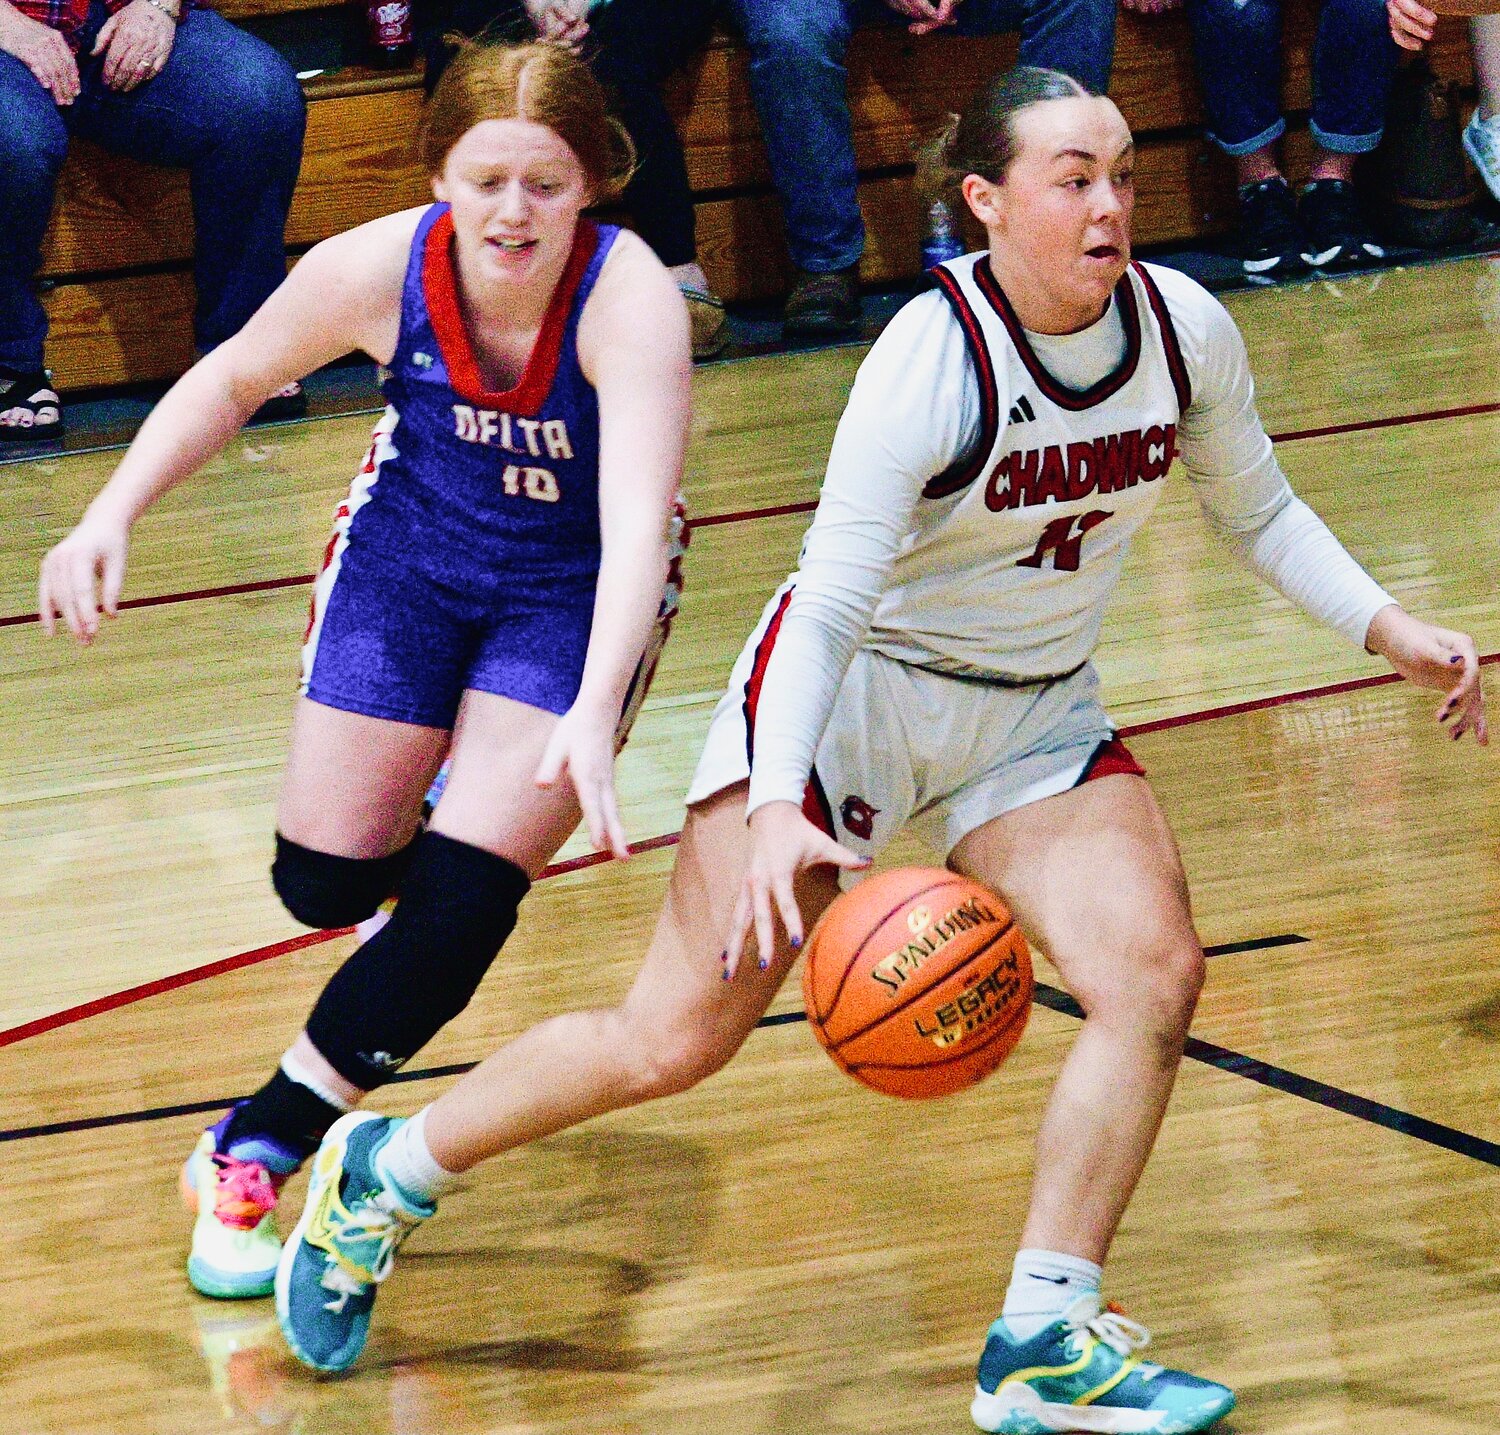 CHADWICK'S ELLA HERD makes a move to the bucket.